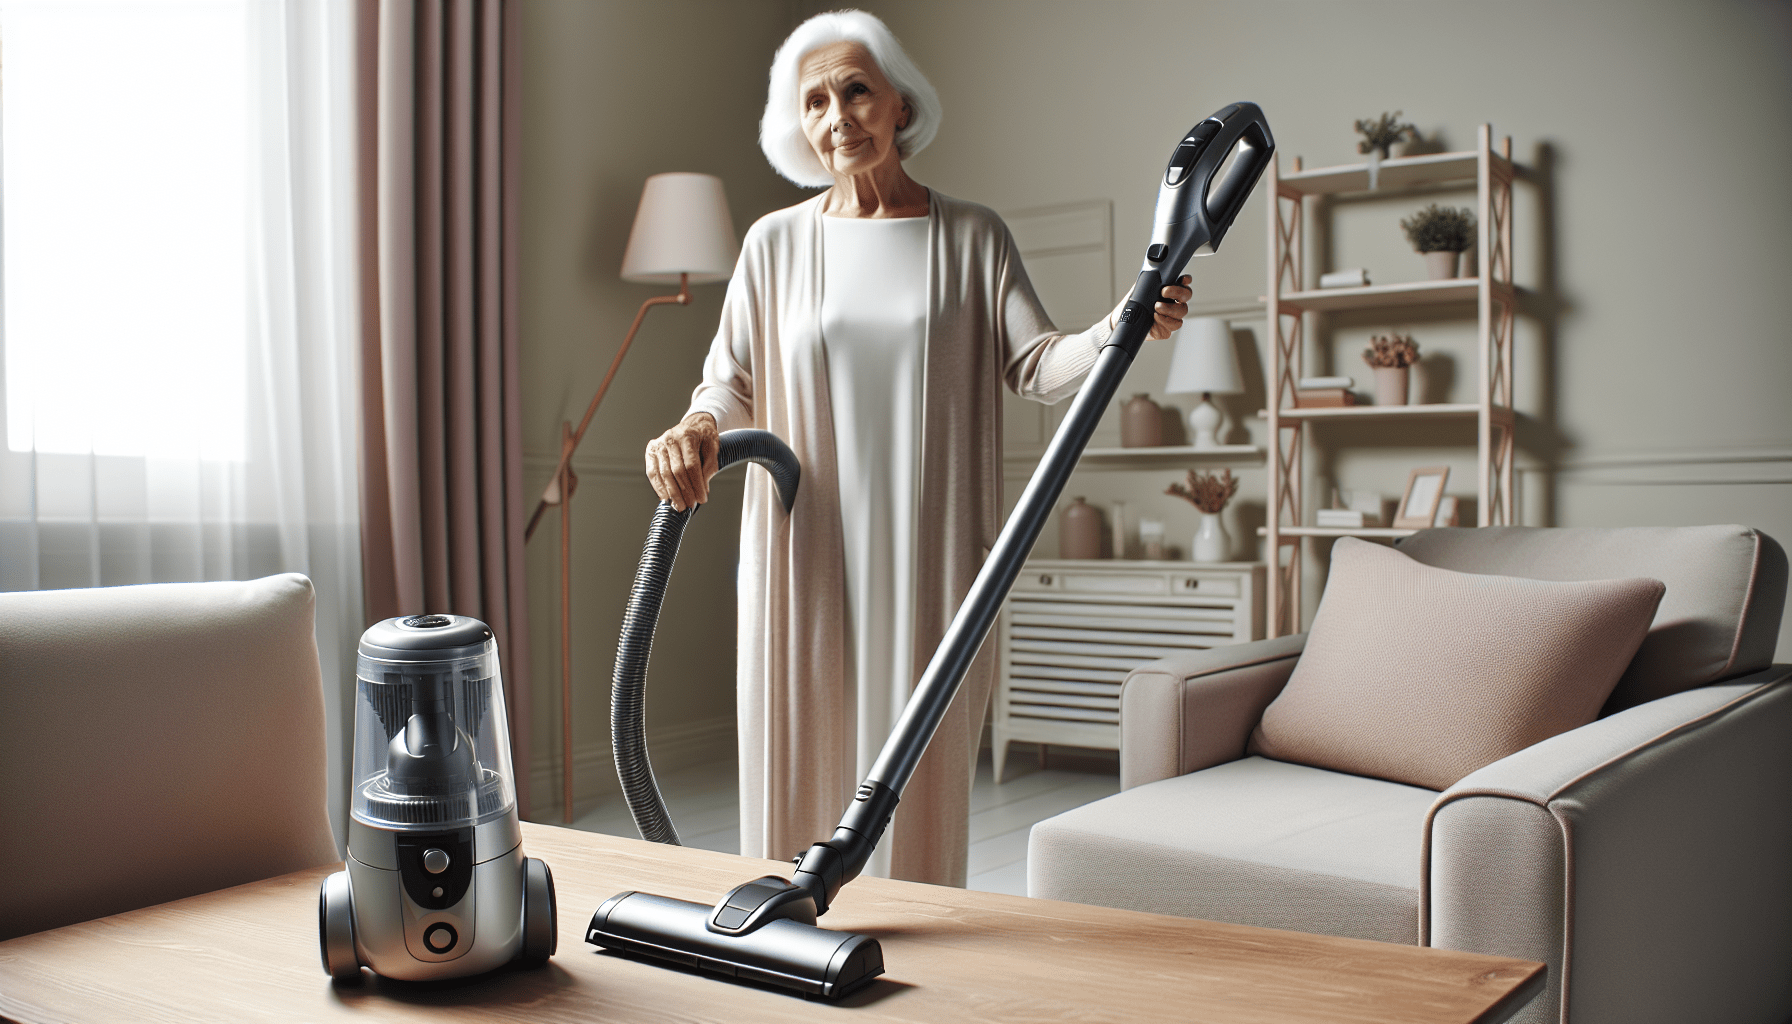 What Is The Best Stick Vacuum For Older People?